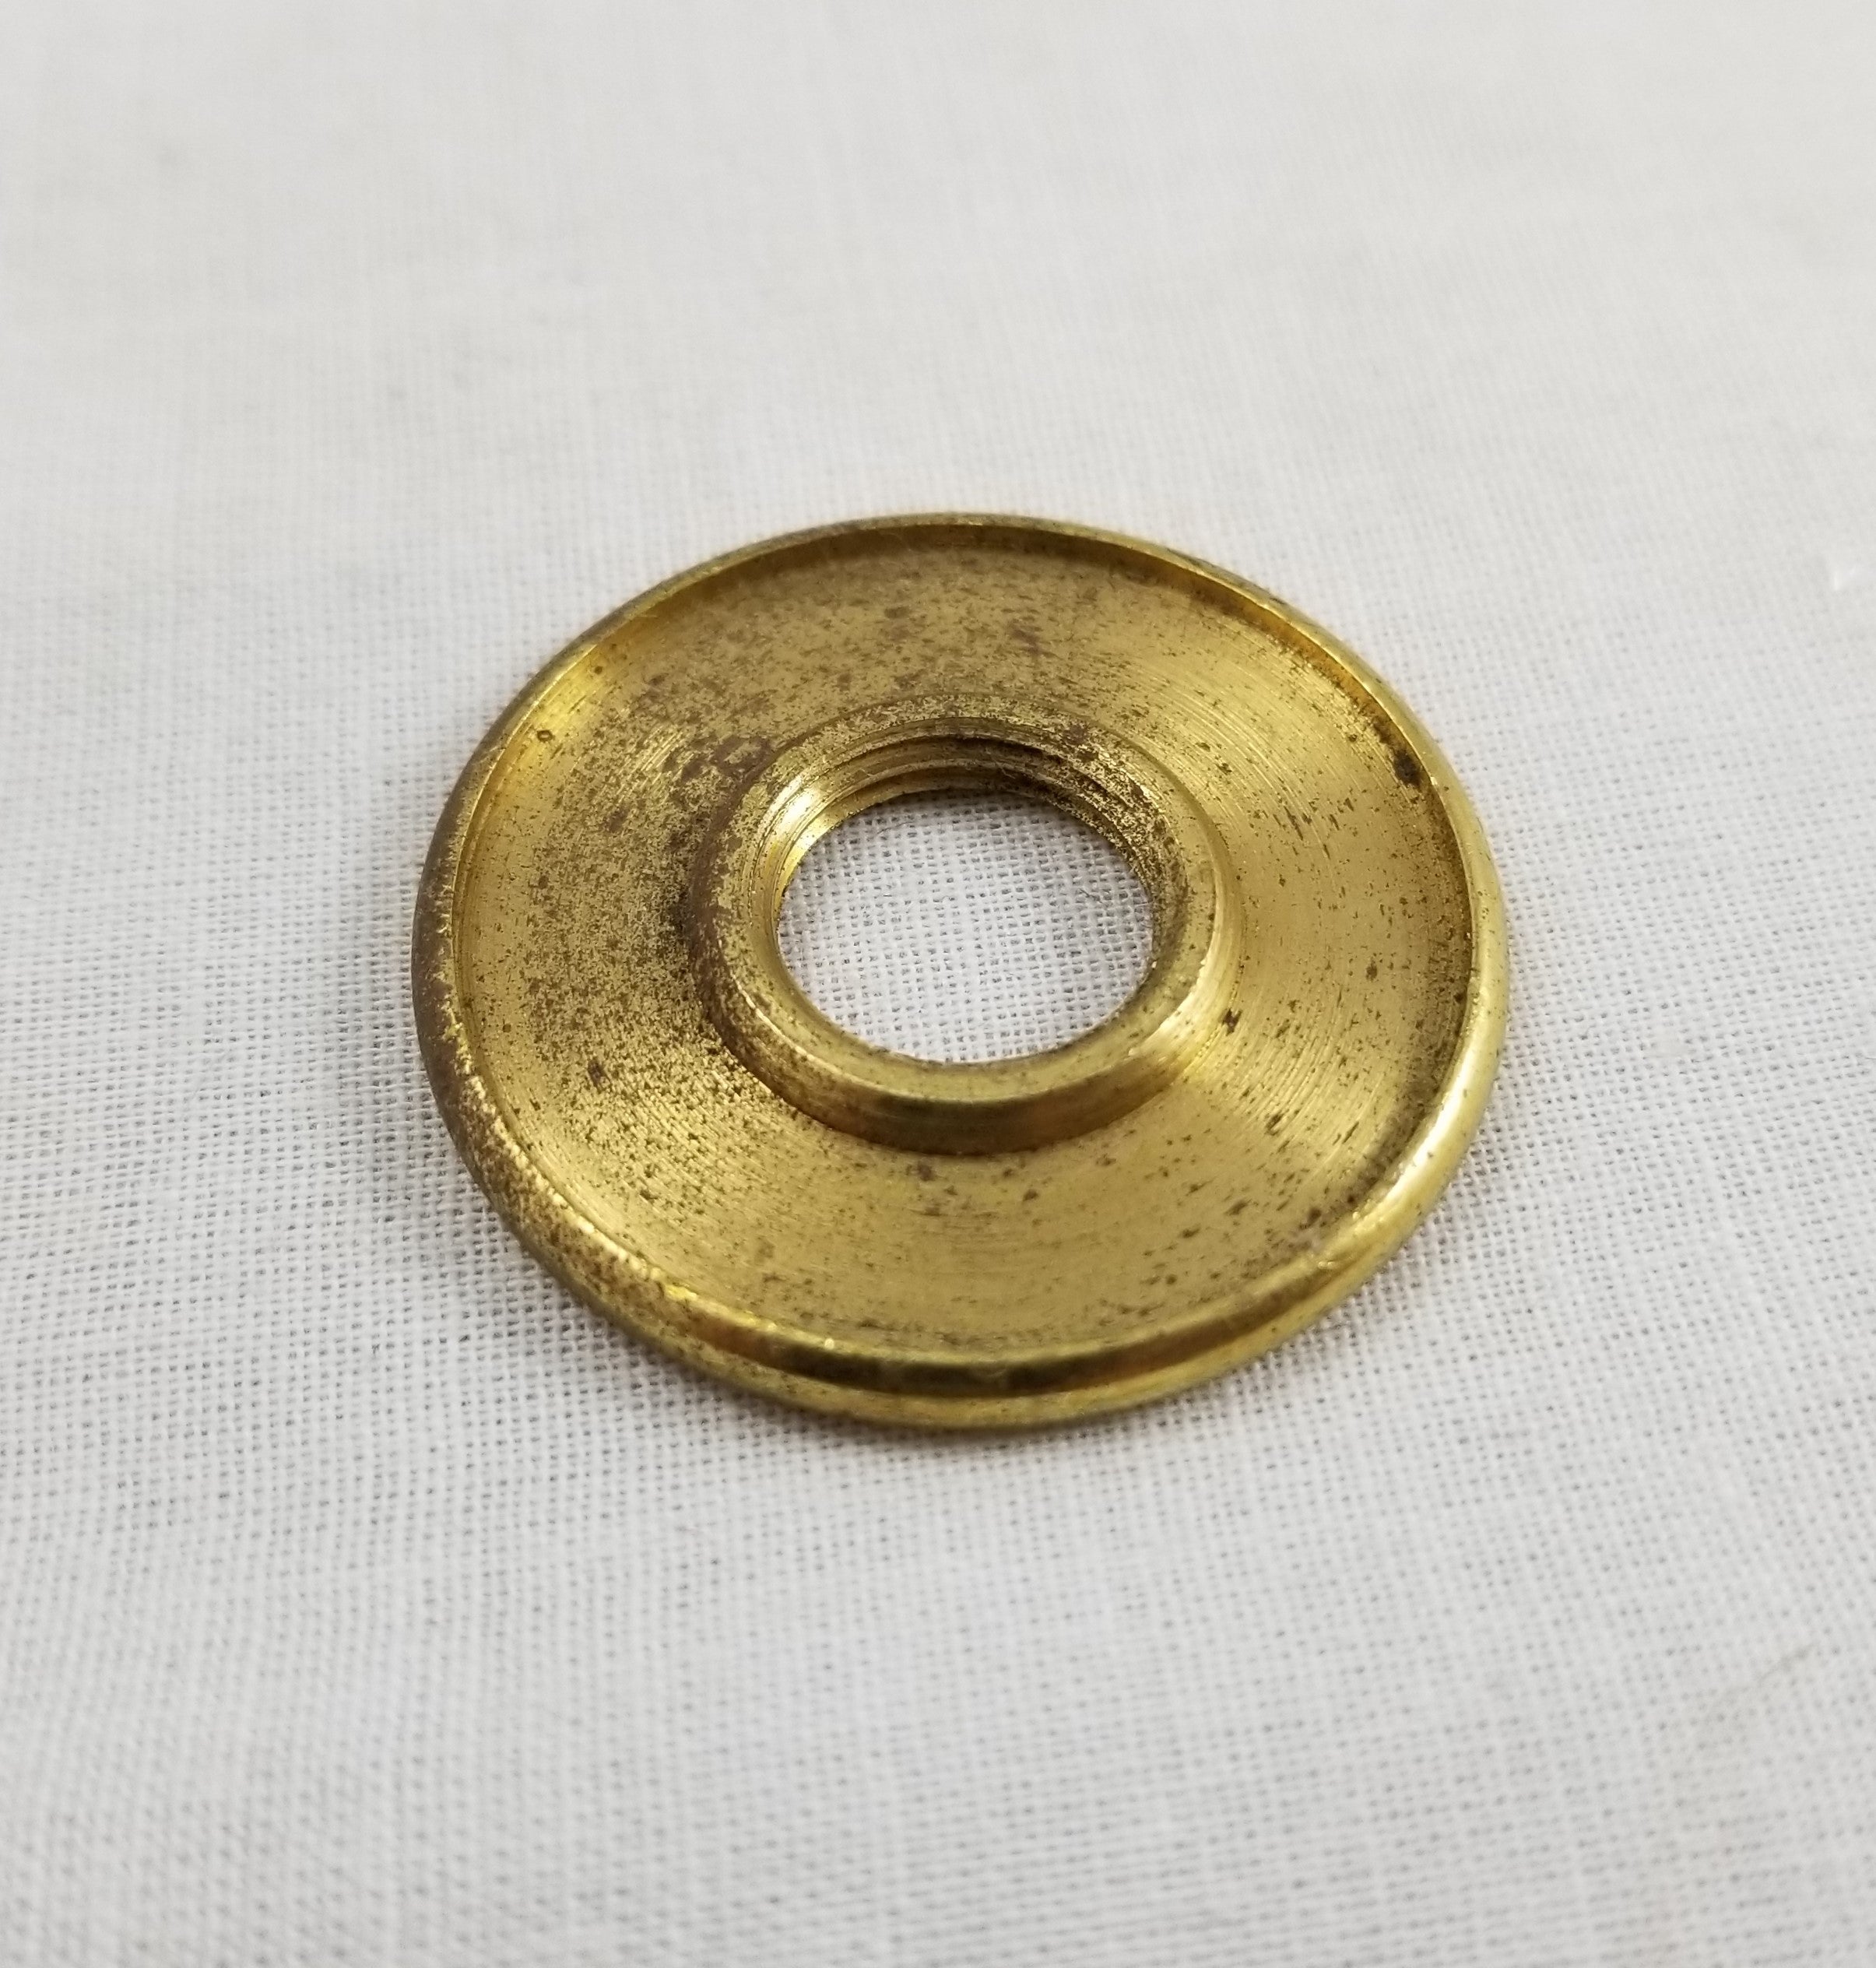 1-1/4" Turned Solid Brass Check Ring - Unfinished Brass - Threaded